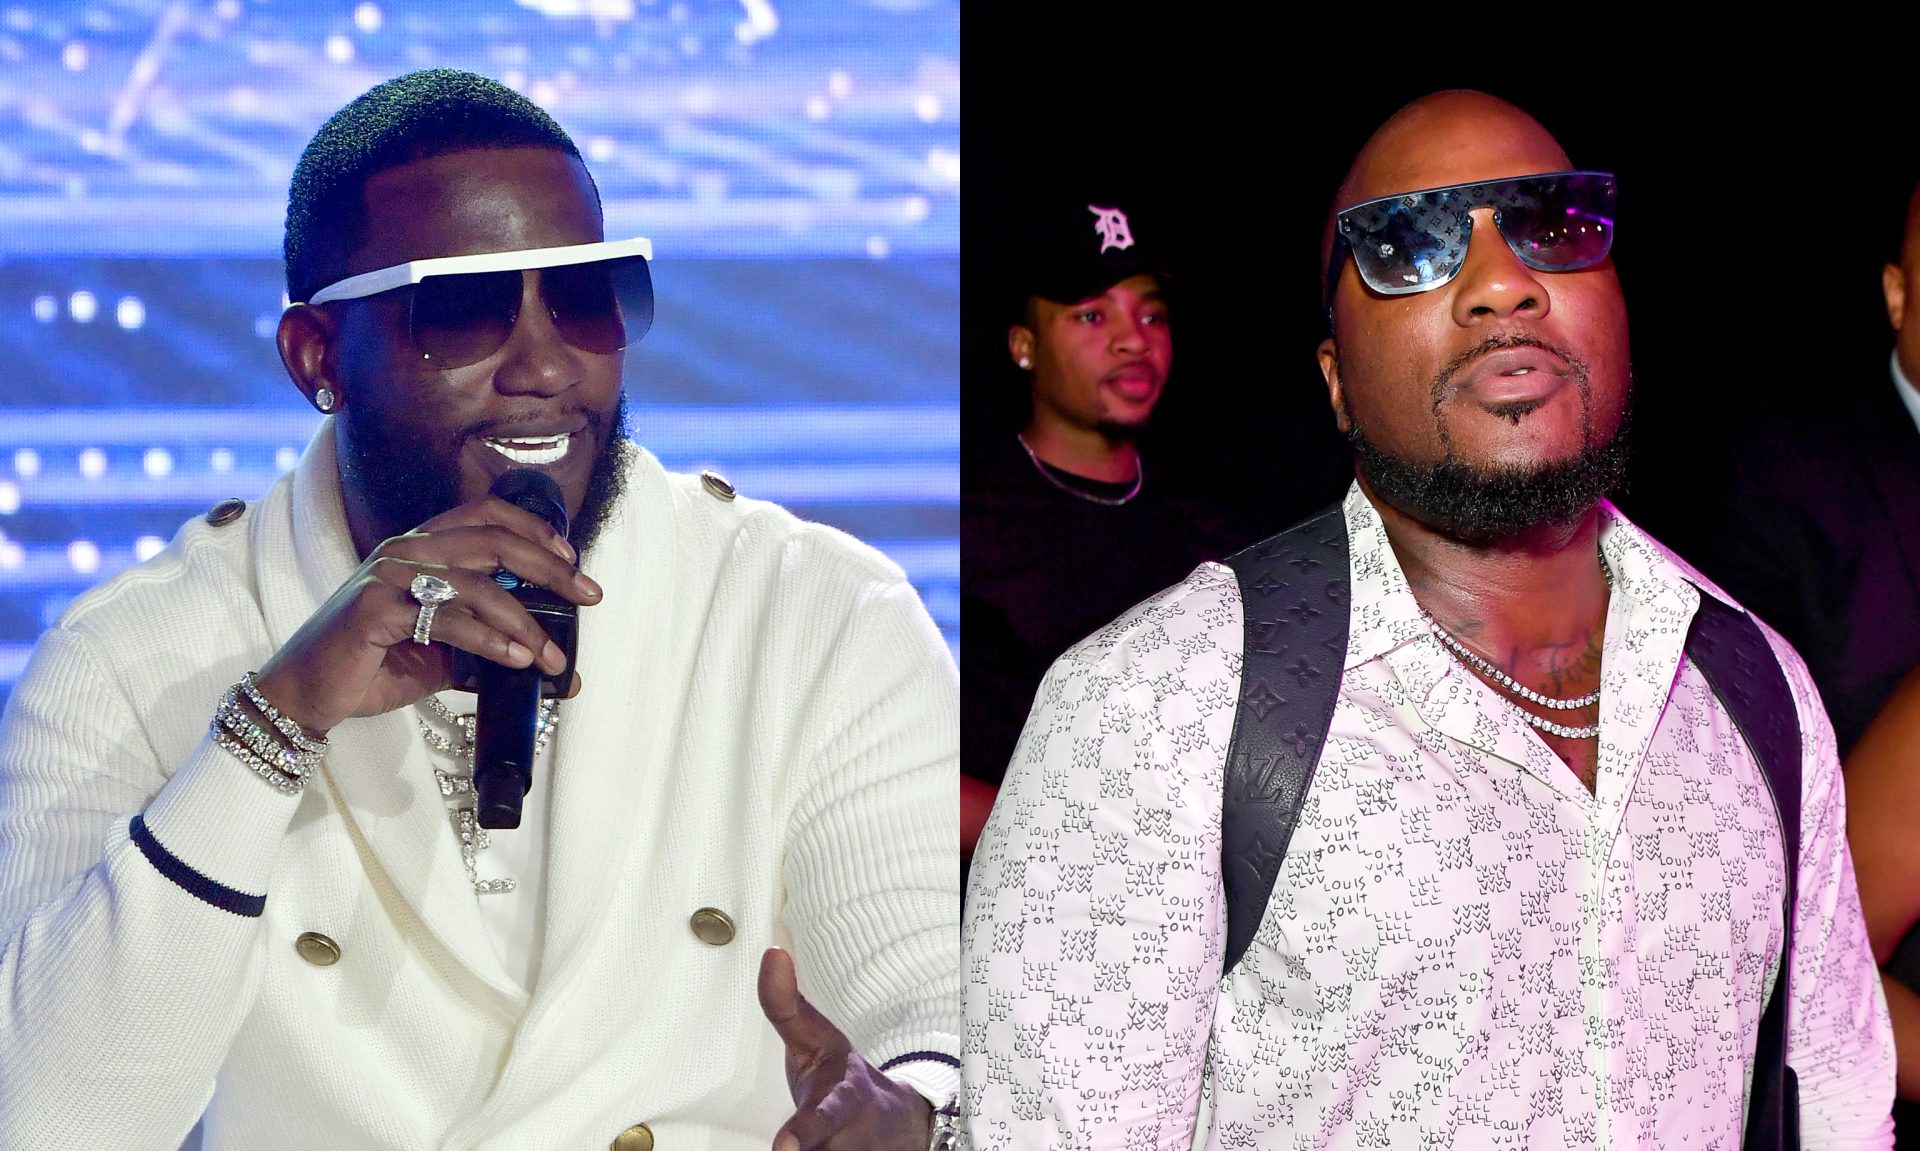 Gucci Mane Didn't Plan To Diss Jeezy's Dead Friend During Verzuz Battle, Says "It Really Just Came Out"